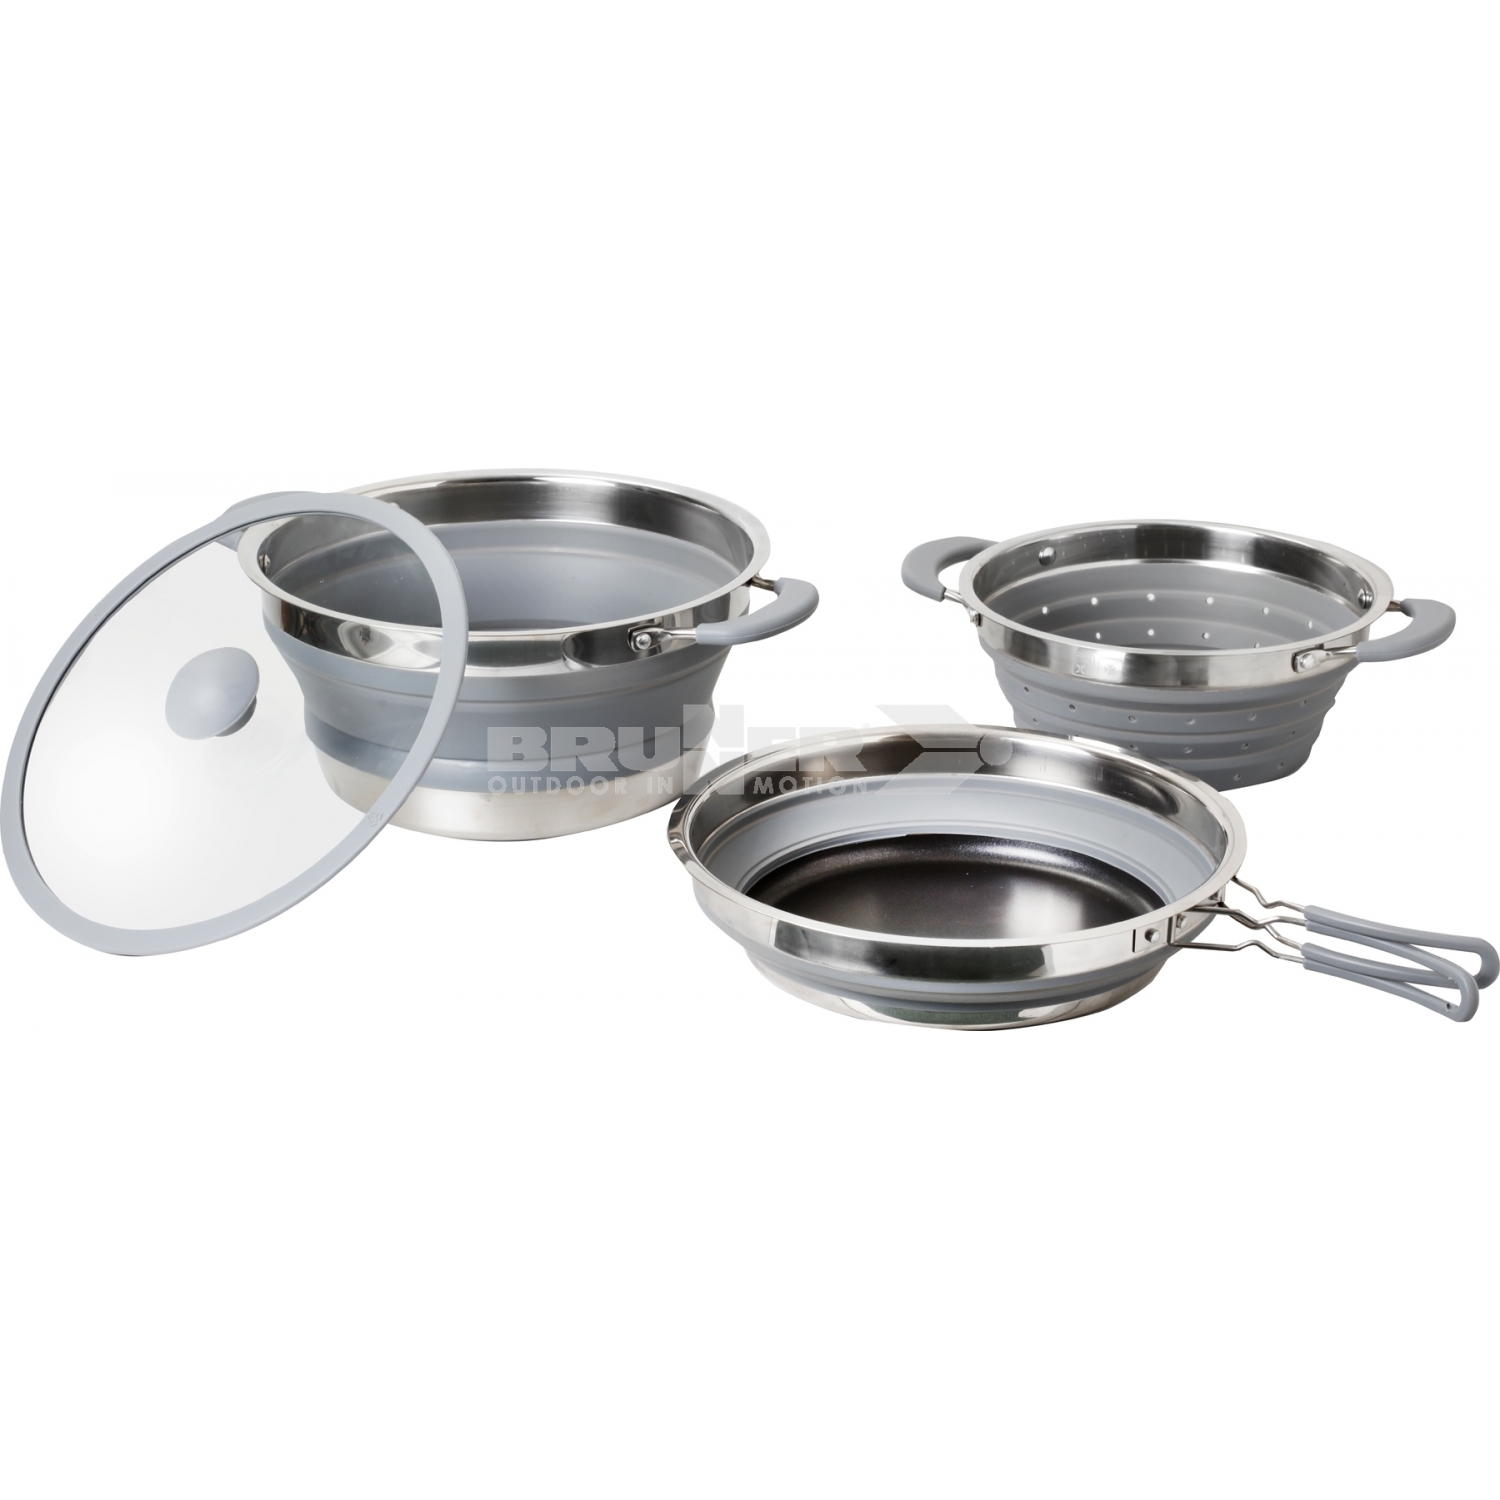 Brunner Volcano Collapsible Silicon Saucepan Set with Colander